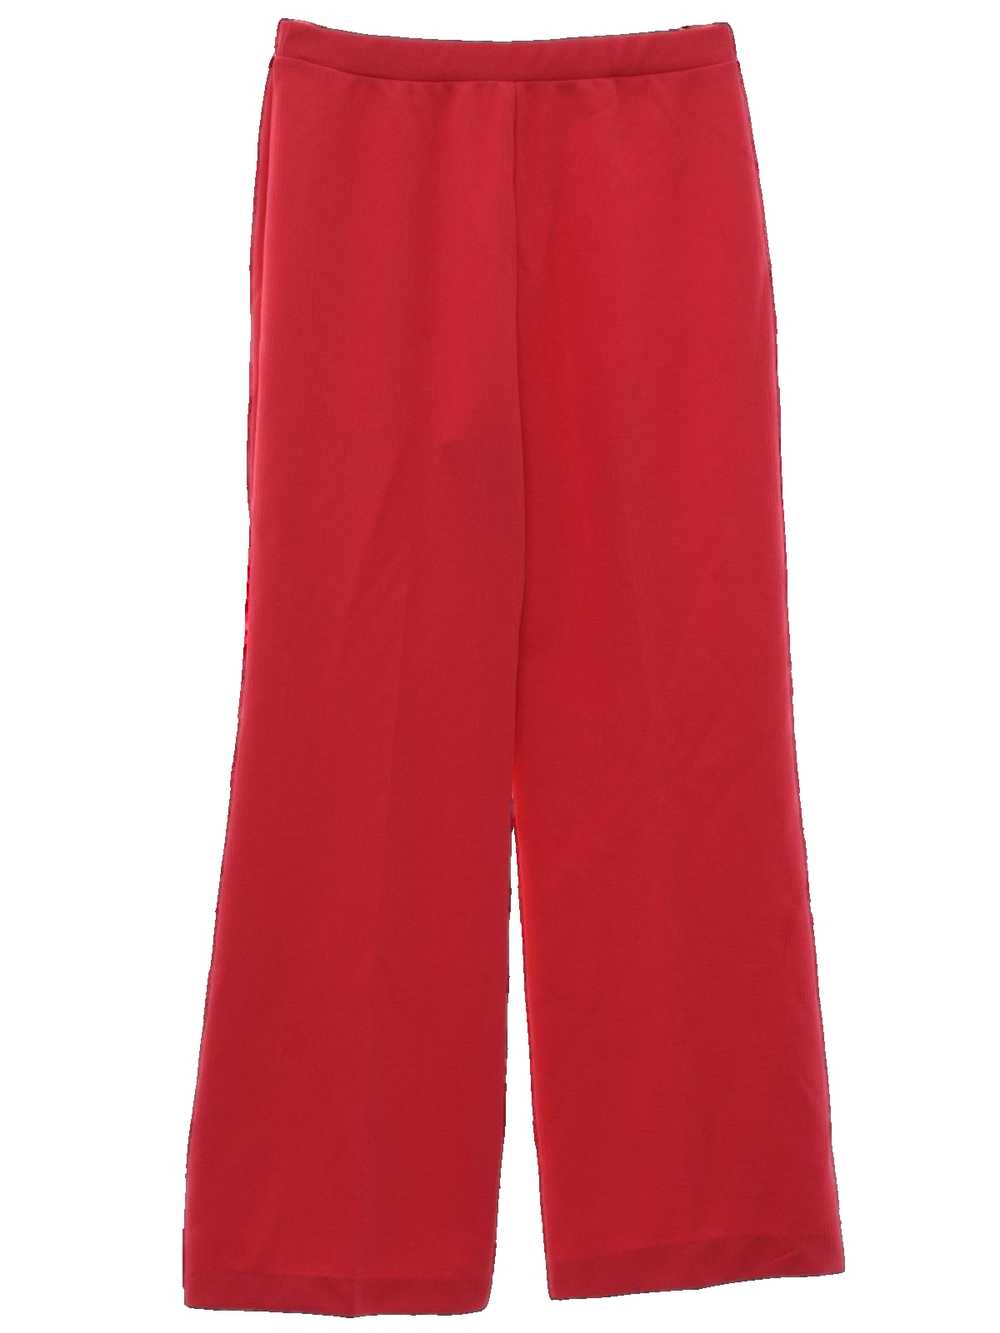 1970's Pykettes Womens Flared Knit Pants - image 3